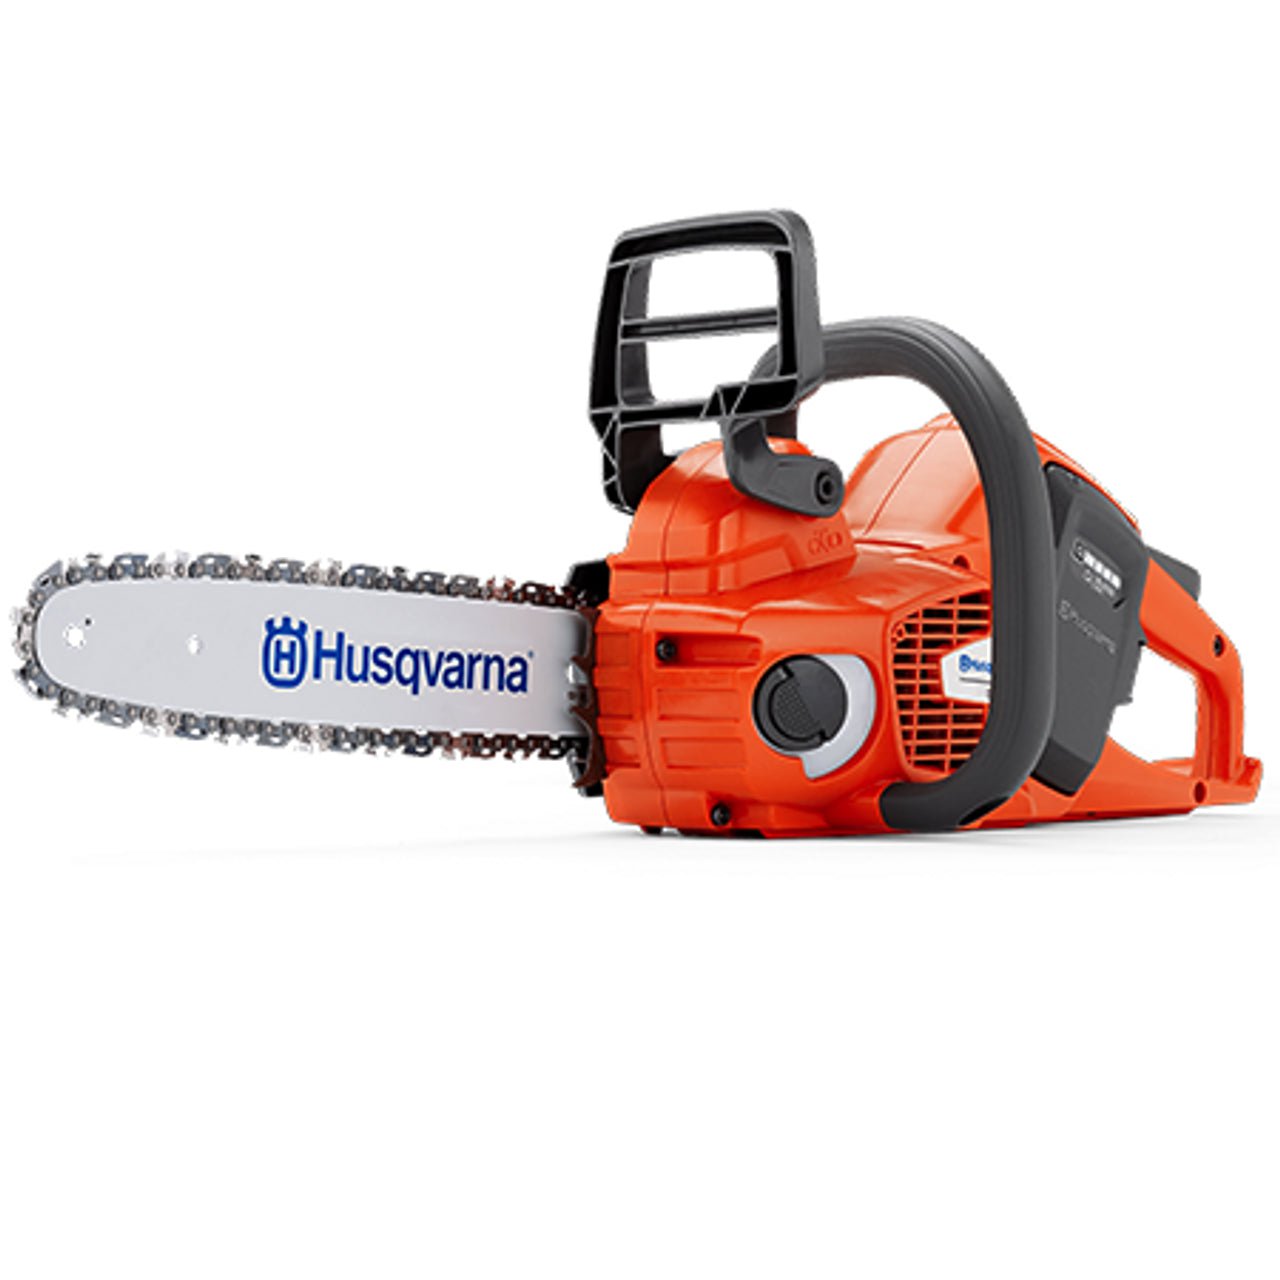 http://firesafetyusa.com/cdn/shop/products/tempest-husqvarna-535i-xp-battery-powered-fire-rescue-chain-saw-with-14-bar-saws-tempest-fire-safety-usa-29650596560957.jpg?v=1663265392